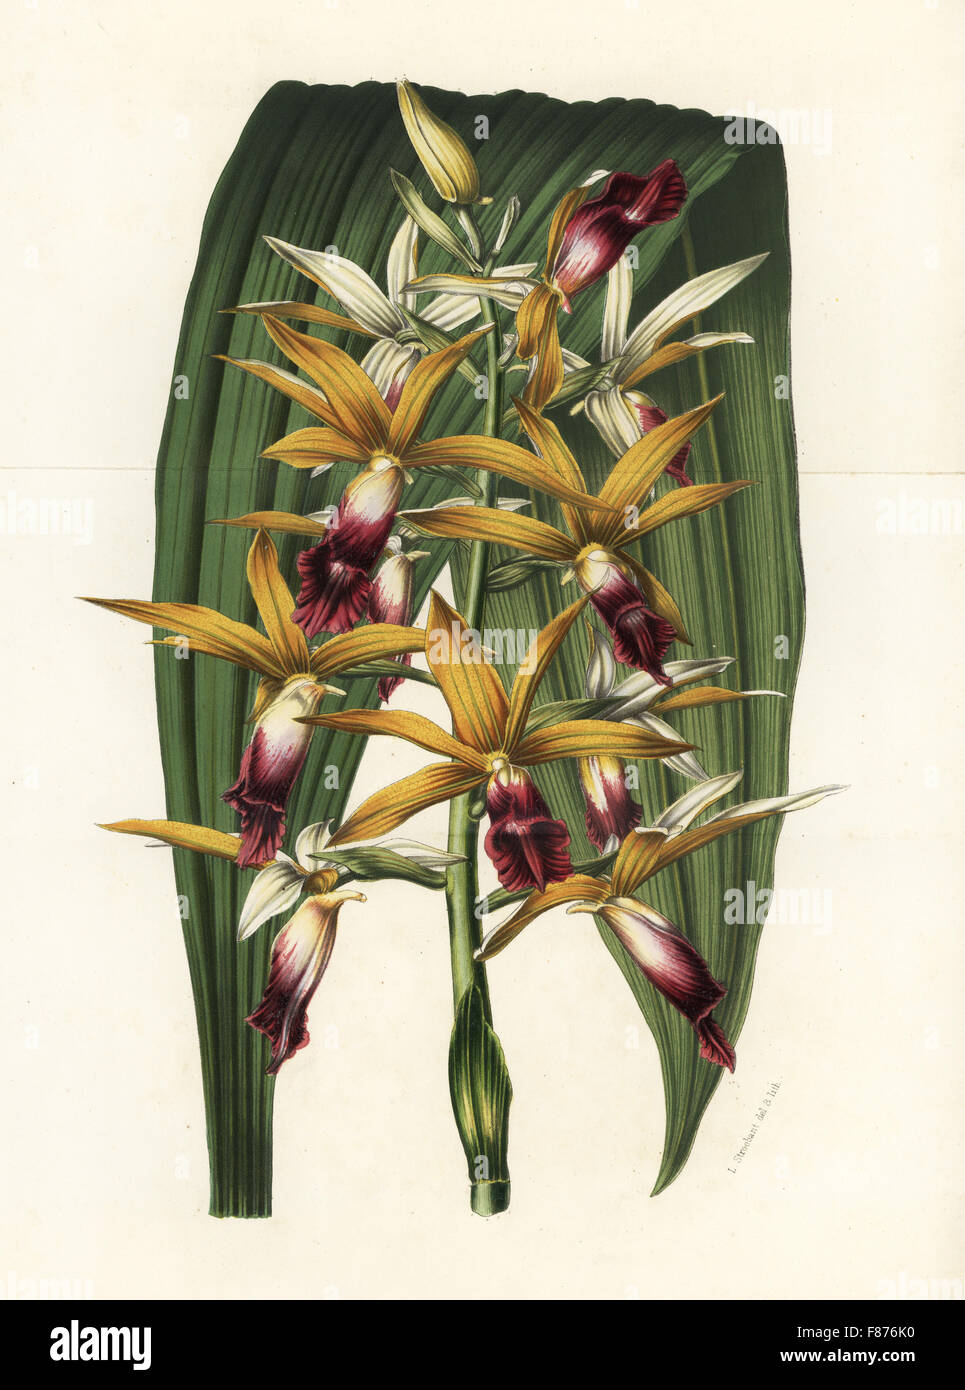 Greater swamp-orchid, Phaius tankervilleae (Phaius grandifolius). Endangered. Handcoloured lithograph from Louis van Houtte and Charles Lemaire's Flowers of the Gardens and Hothouses of Europe, Flore des Serres et des Jardins de l'Europe, Ghent, Belgium, 1851. Stock Photo